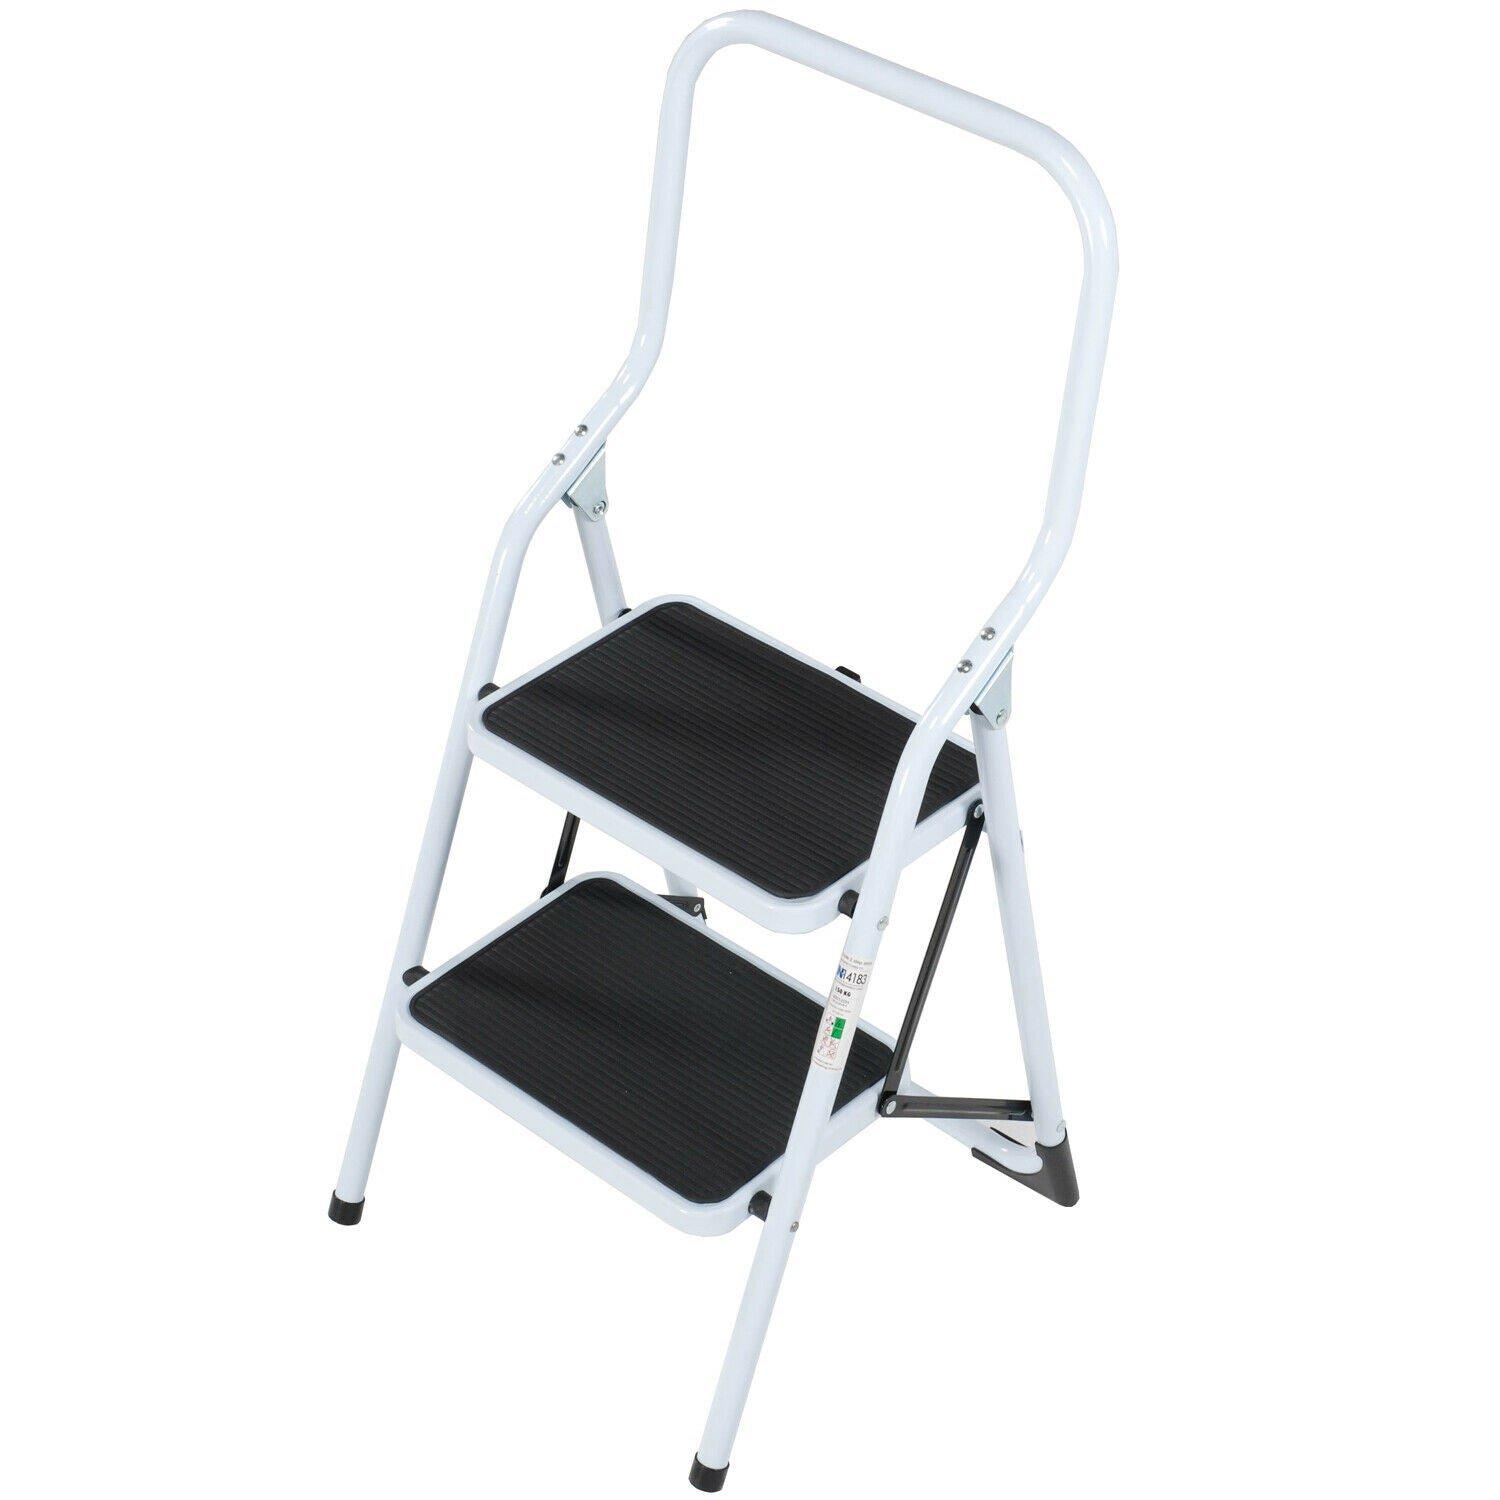 0.5m Folding Step Ladder Safety Stool 2 Tread Compact Anti Slip Rubber Steps